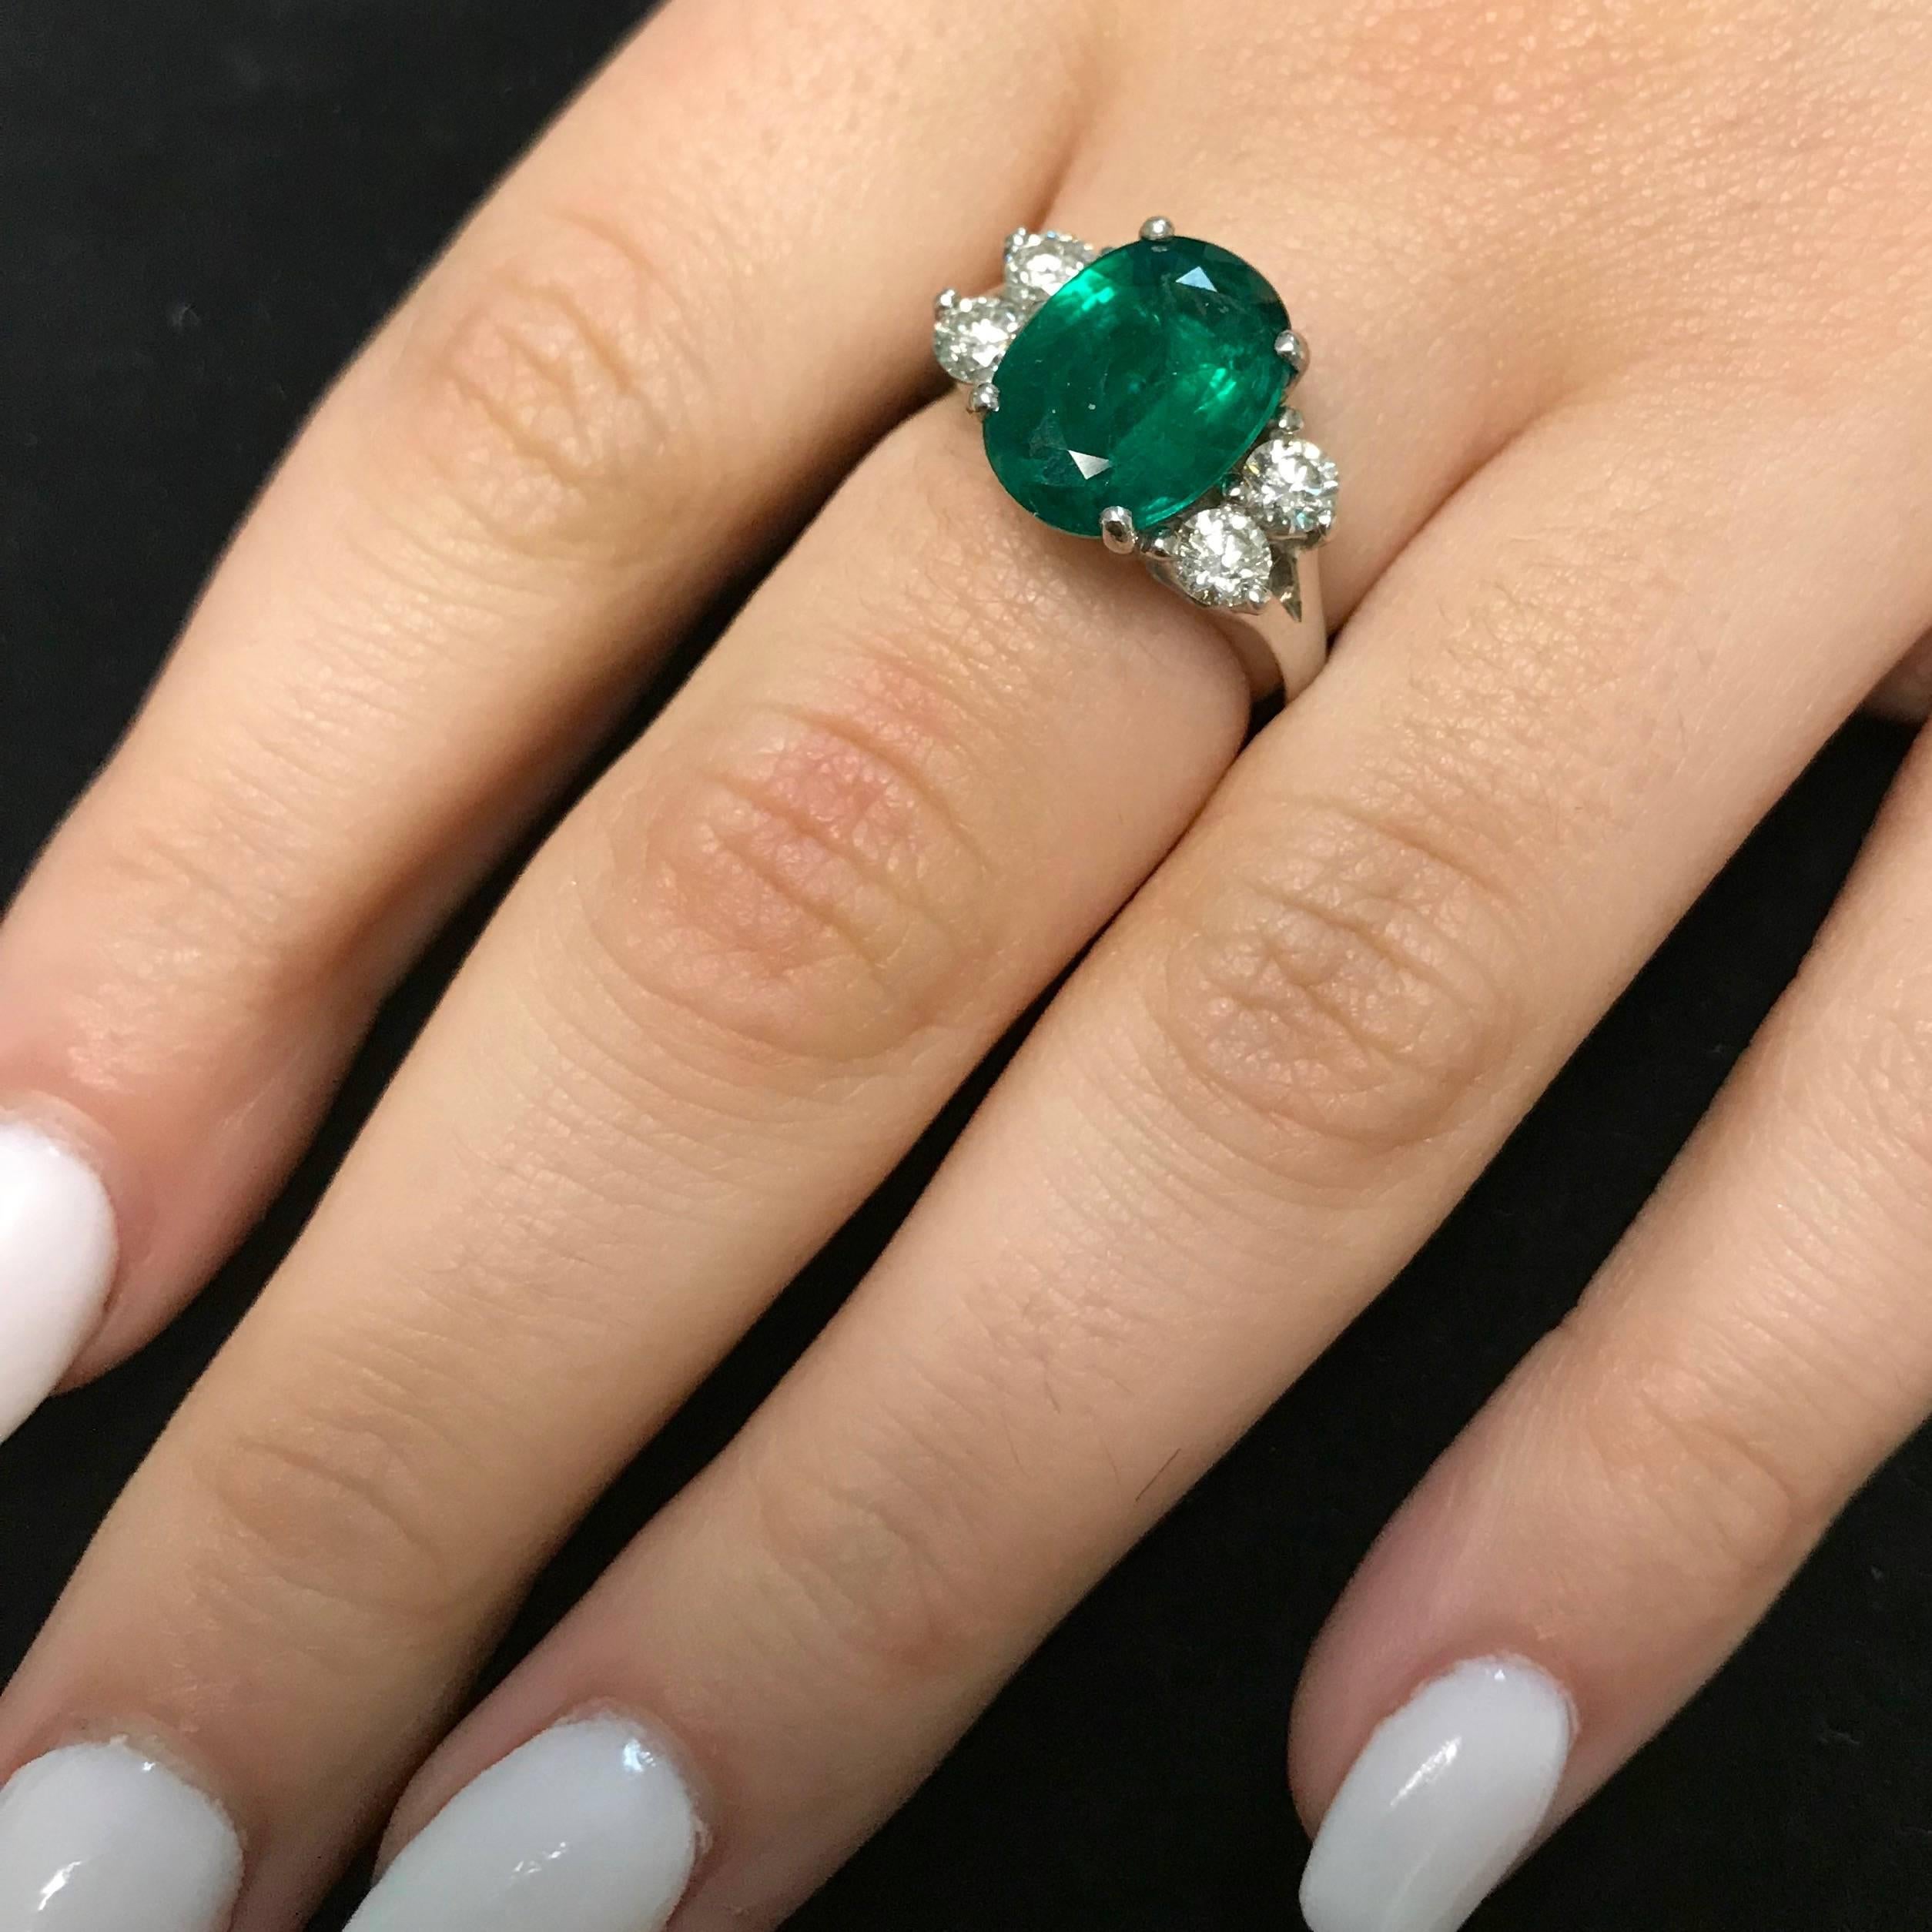 Material: 18k White Gold
Gemstones: 1 Oval Emerald at 3.77 Carats. Measuring 9 x 12.5 mm.
Diamonds: 4 Brilliant Round White Diamonds at 0.72 Carats. SI Clarity / H-I Color. 
Ring Size: 6.5. Alberto offers complimentary sizing on all rings.

Fine